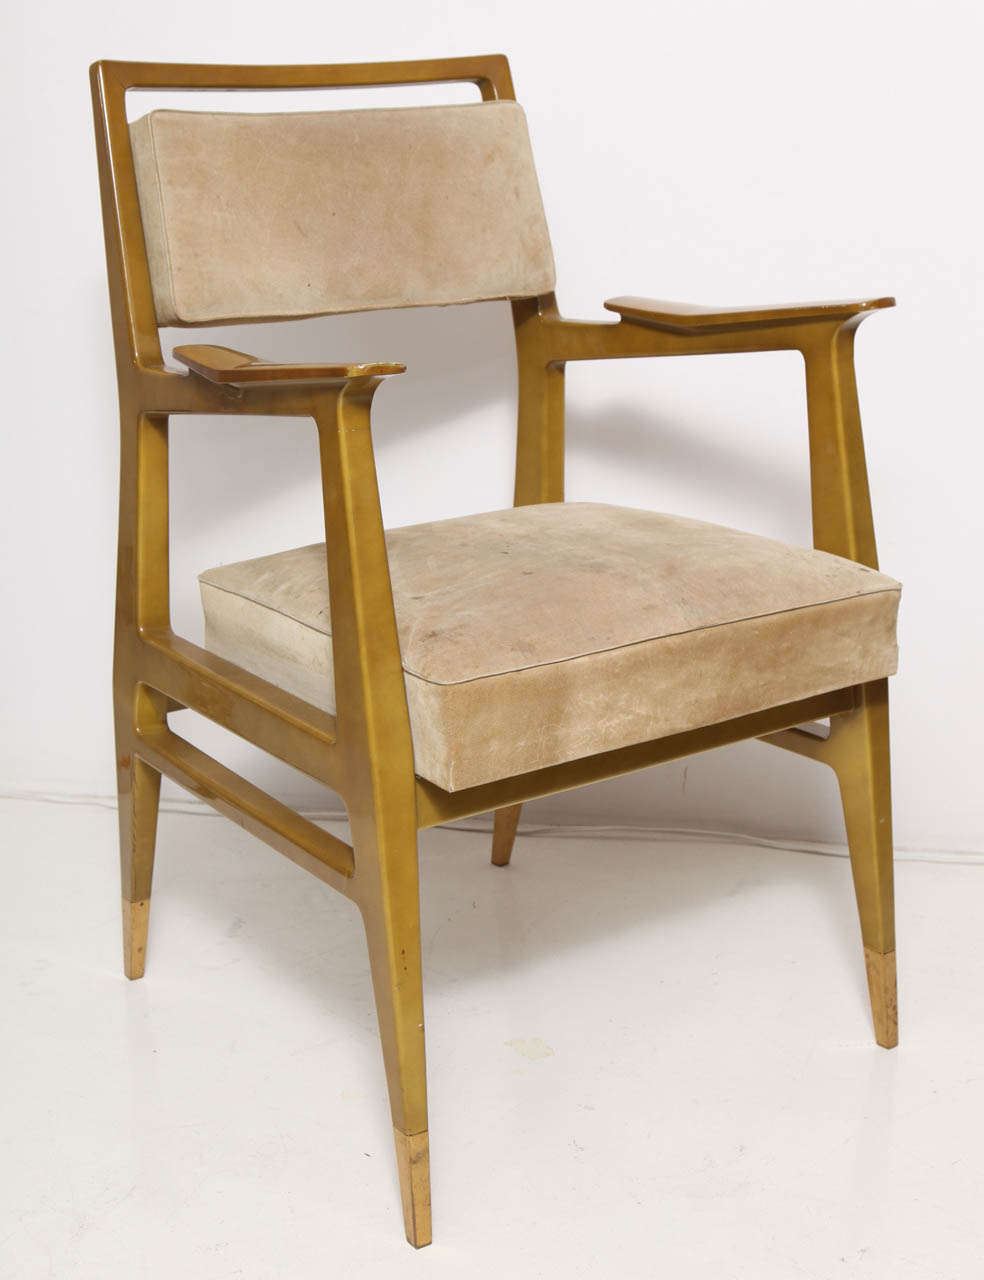 Raphaël Raffel (1912-2000).  Pair of armchairs in dark goldenrod lacquered wood raised on tapering legs with brass sabots. Suede-upholstered seat and back.  French, circa 1950's.